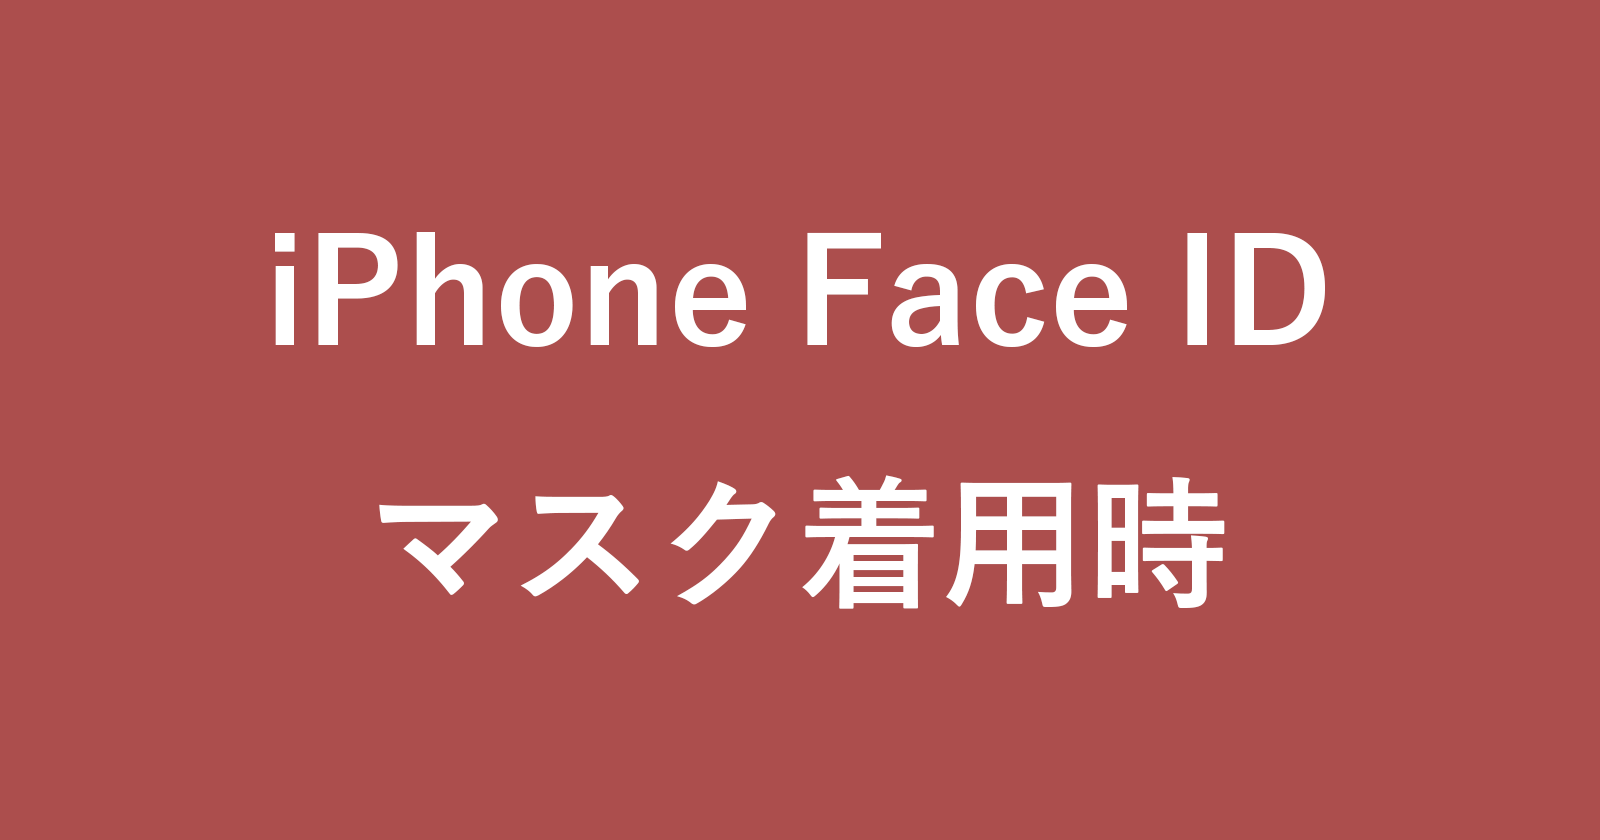 iphone face id wearing mask